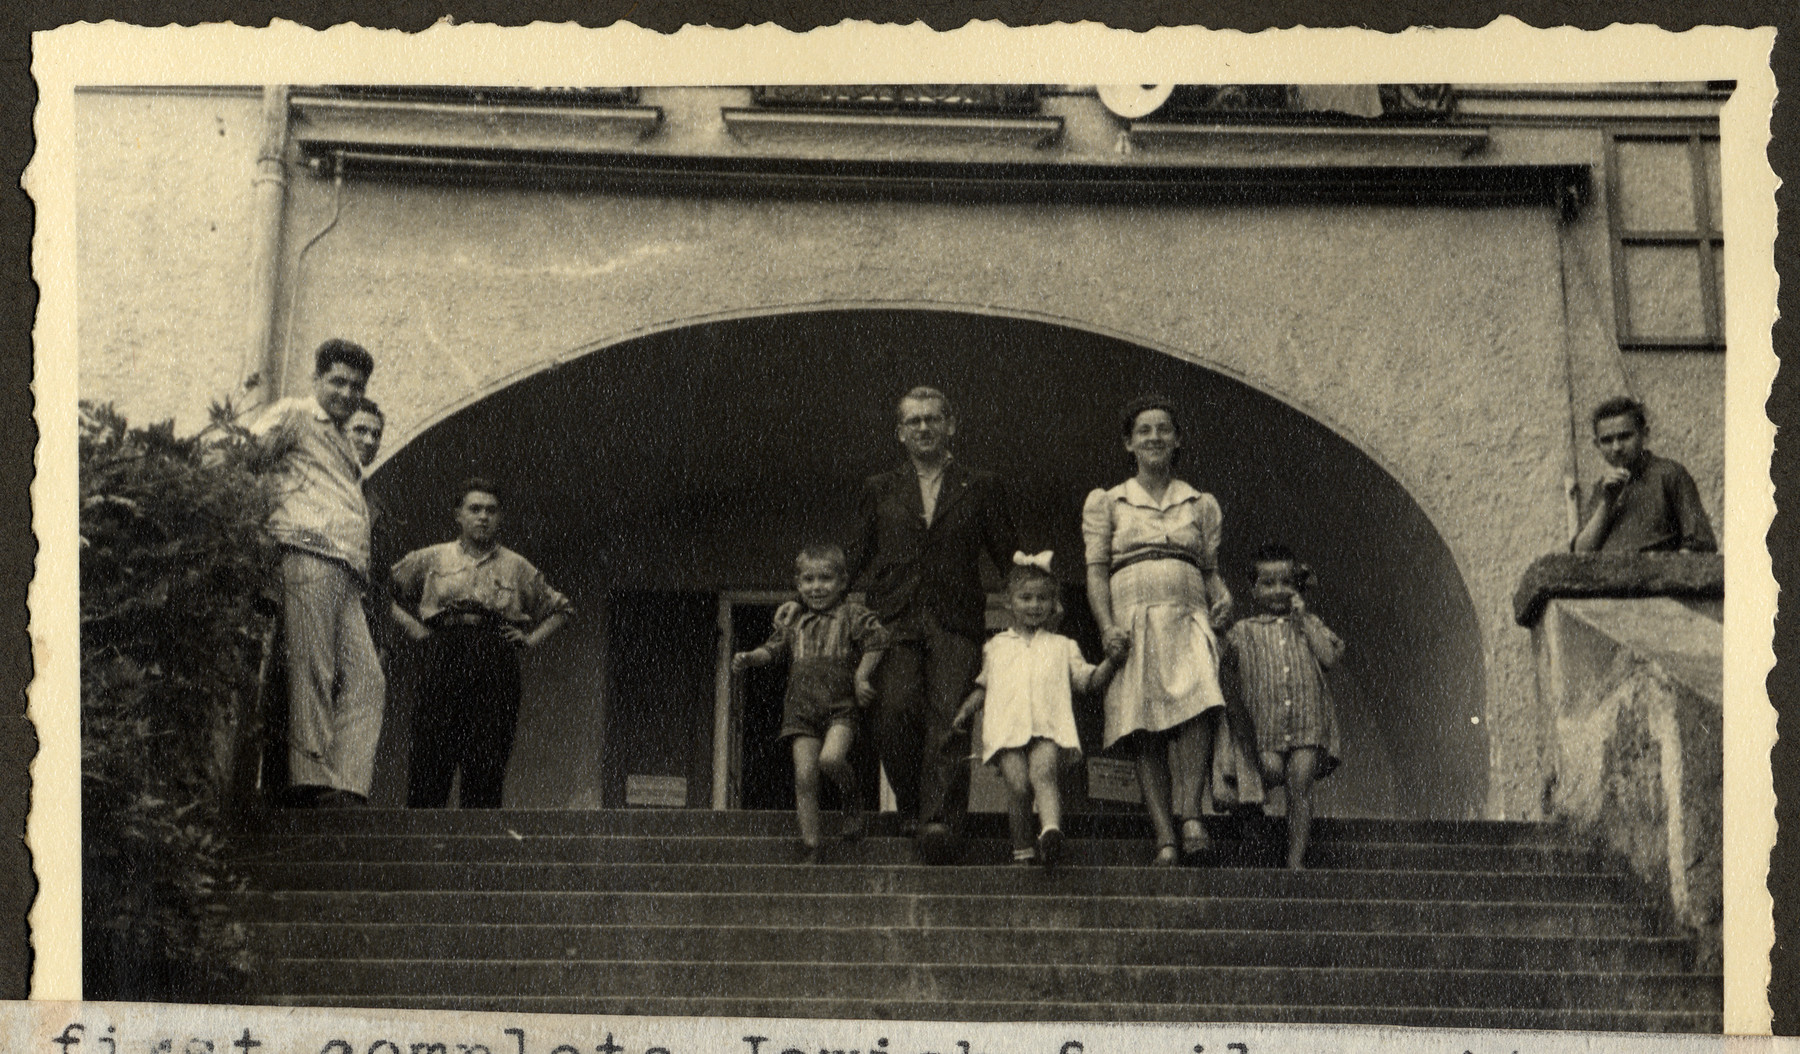 A reunited Jewish family walks down an exterior  flight of stairs in the Feldafing displaced persons' camp.

The original caption reads: "The first complete Jewish family unit from Poland.  Parents survived years in concentration camps; their little girl was hidden with Polish peasants, until the parents called for her.  The two boys are orphans, -- only other children at Feldafing."